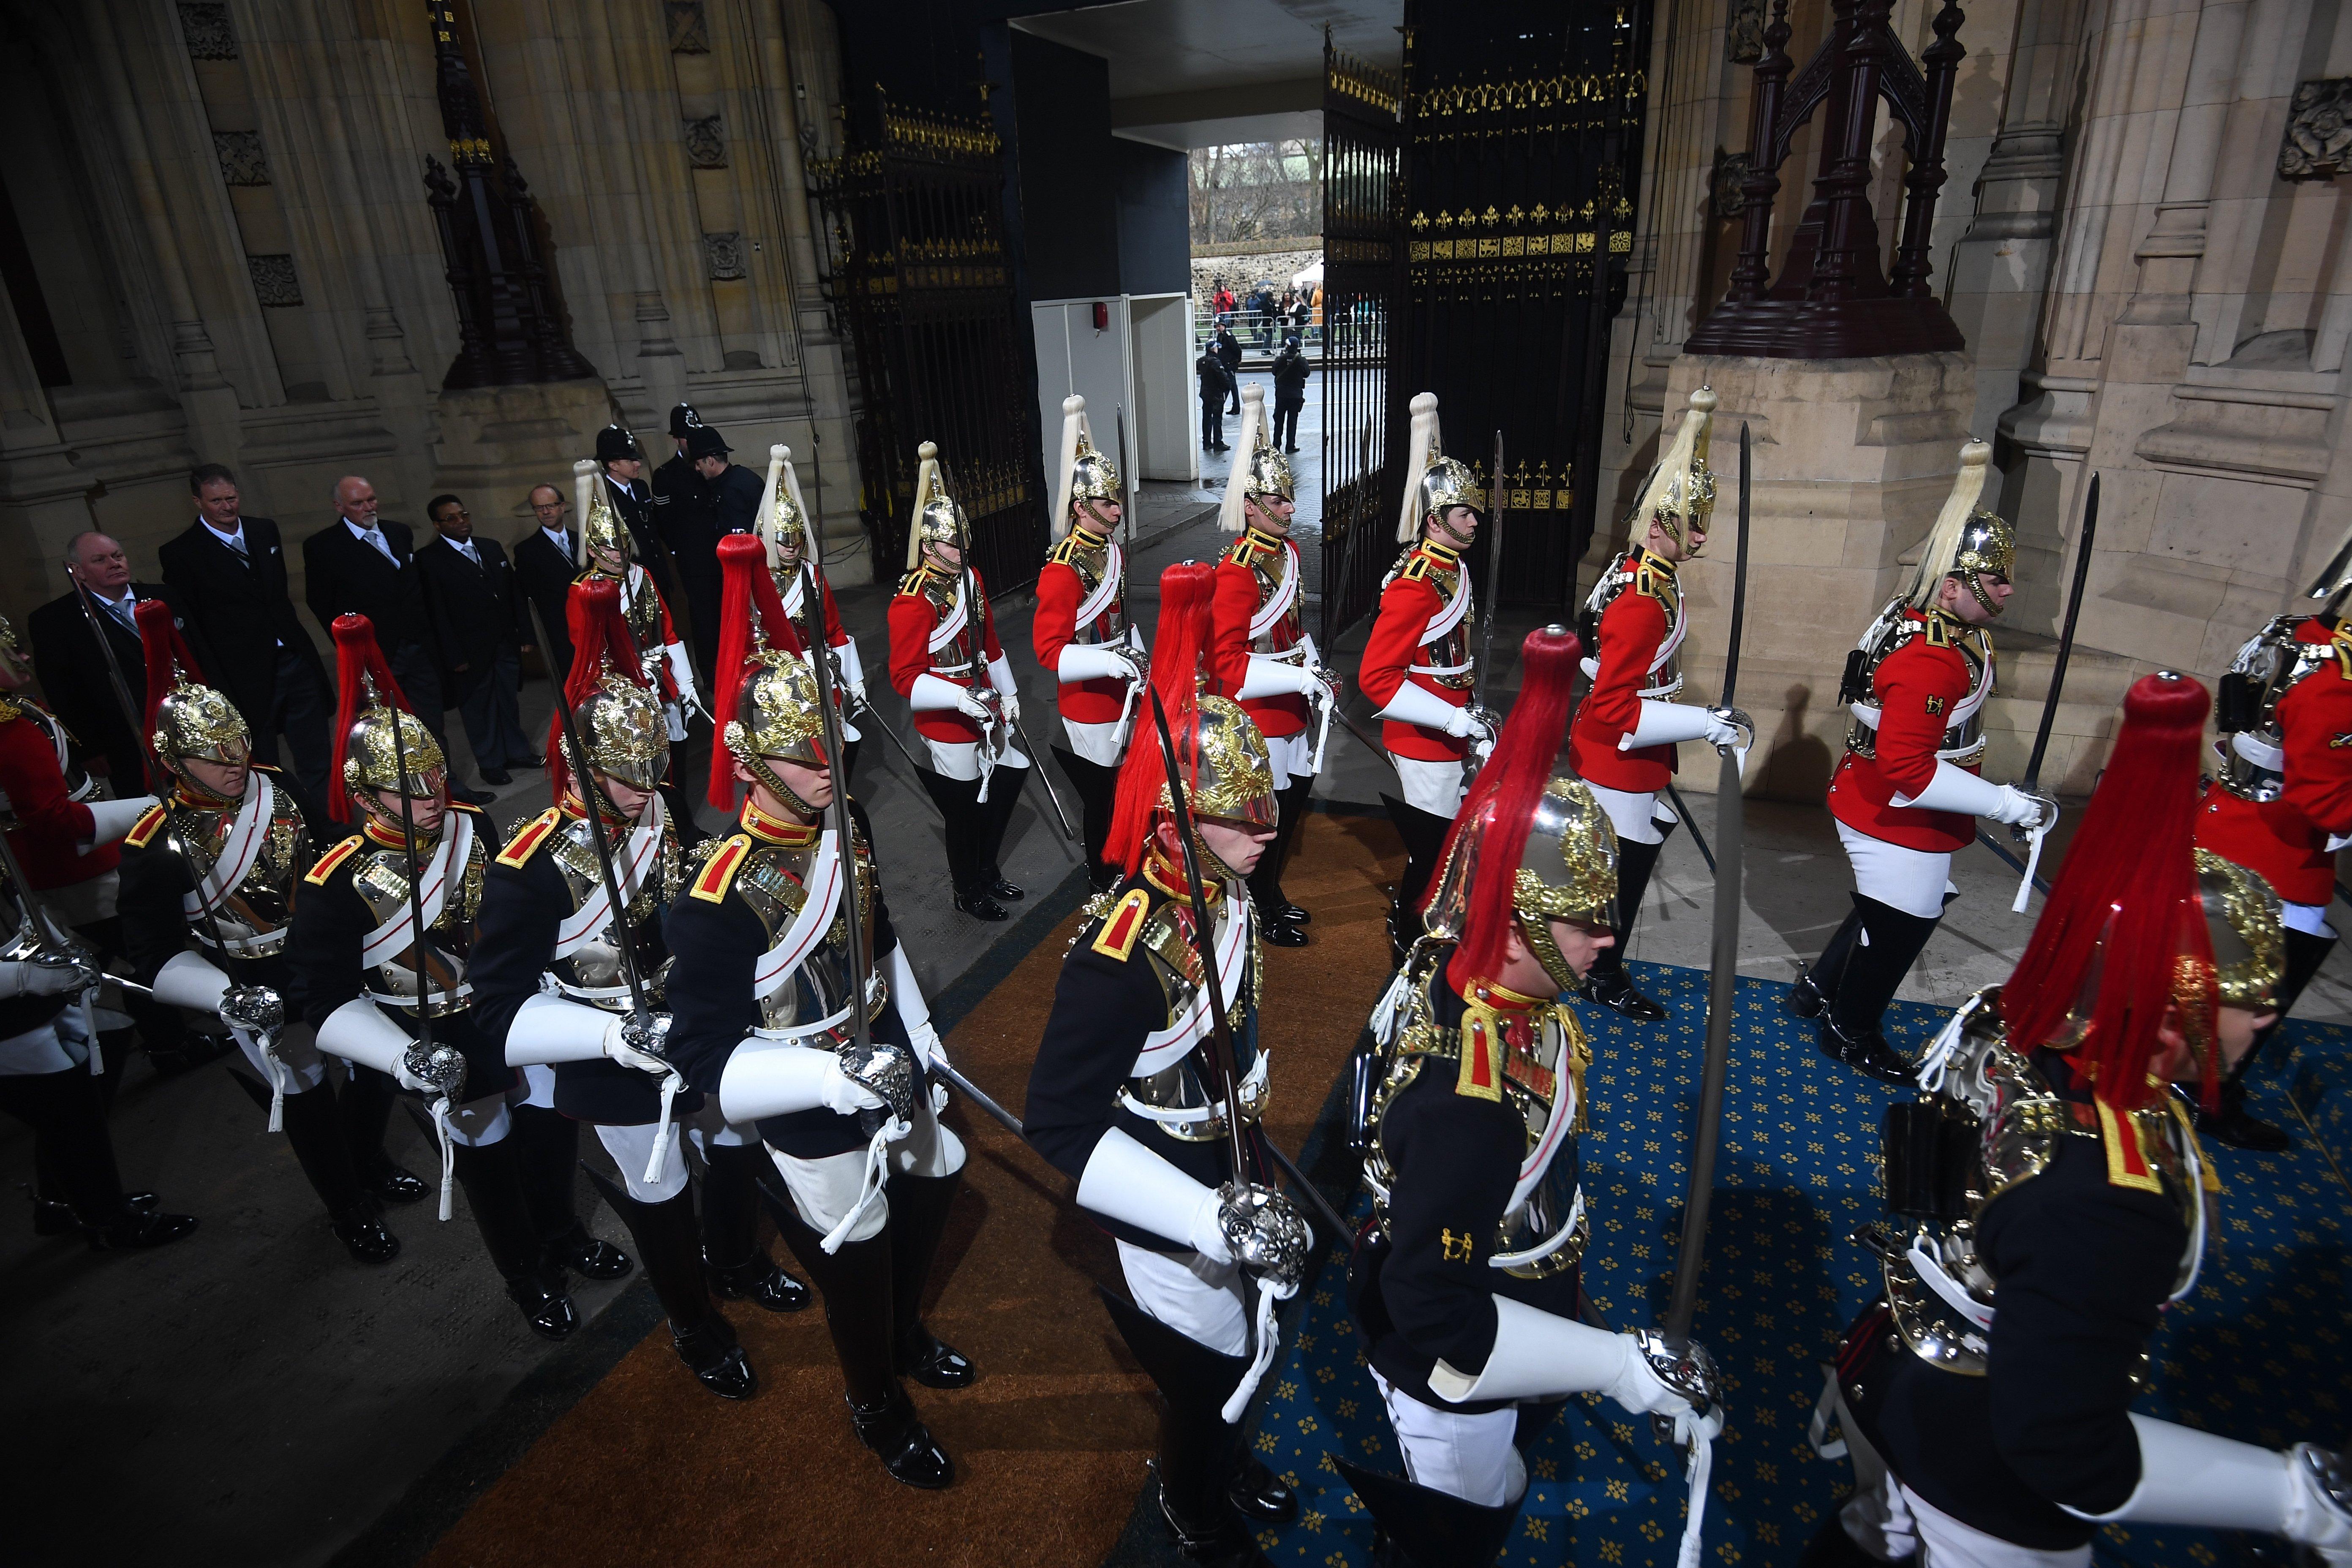 Members of the Household Cavalry parade through the Sovereign's entrance ahead of the State Opening of Parliament by Queen Elizabeth II, in the House of Lords at the Palace of Westminster in London.